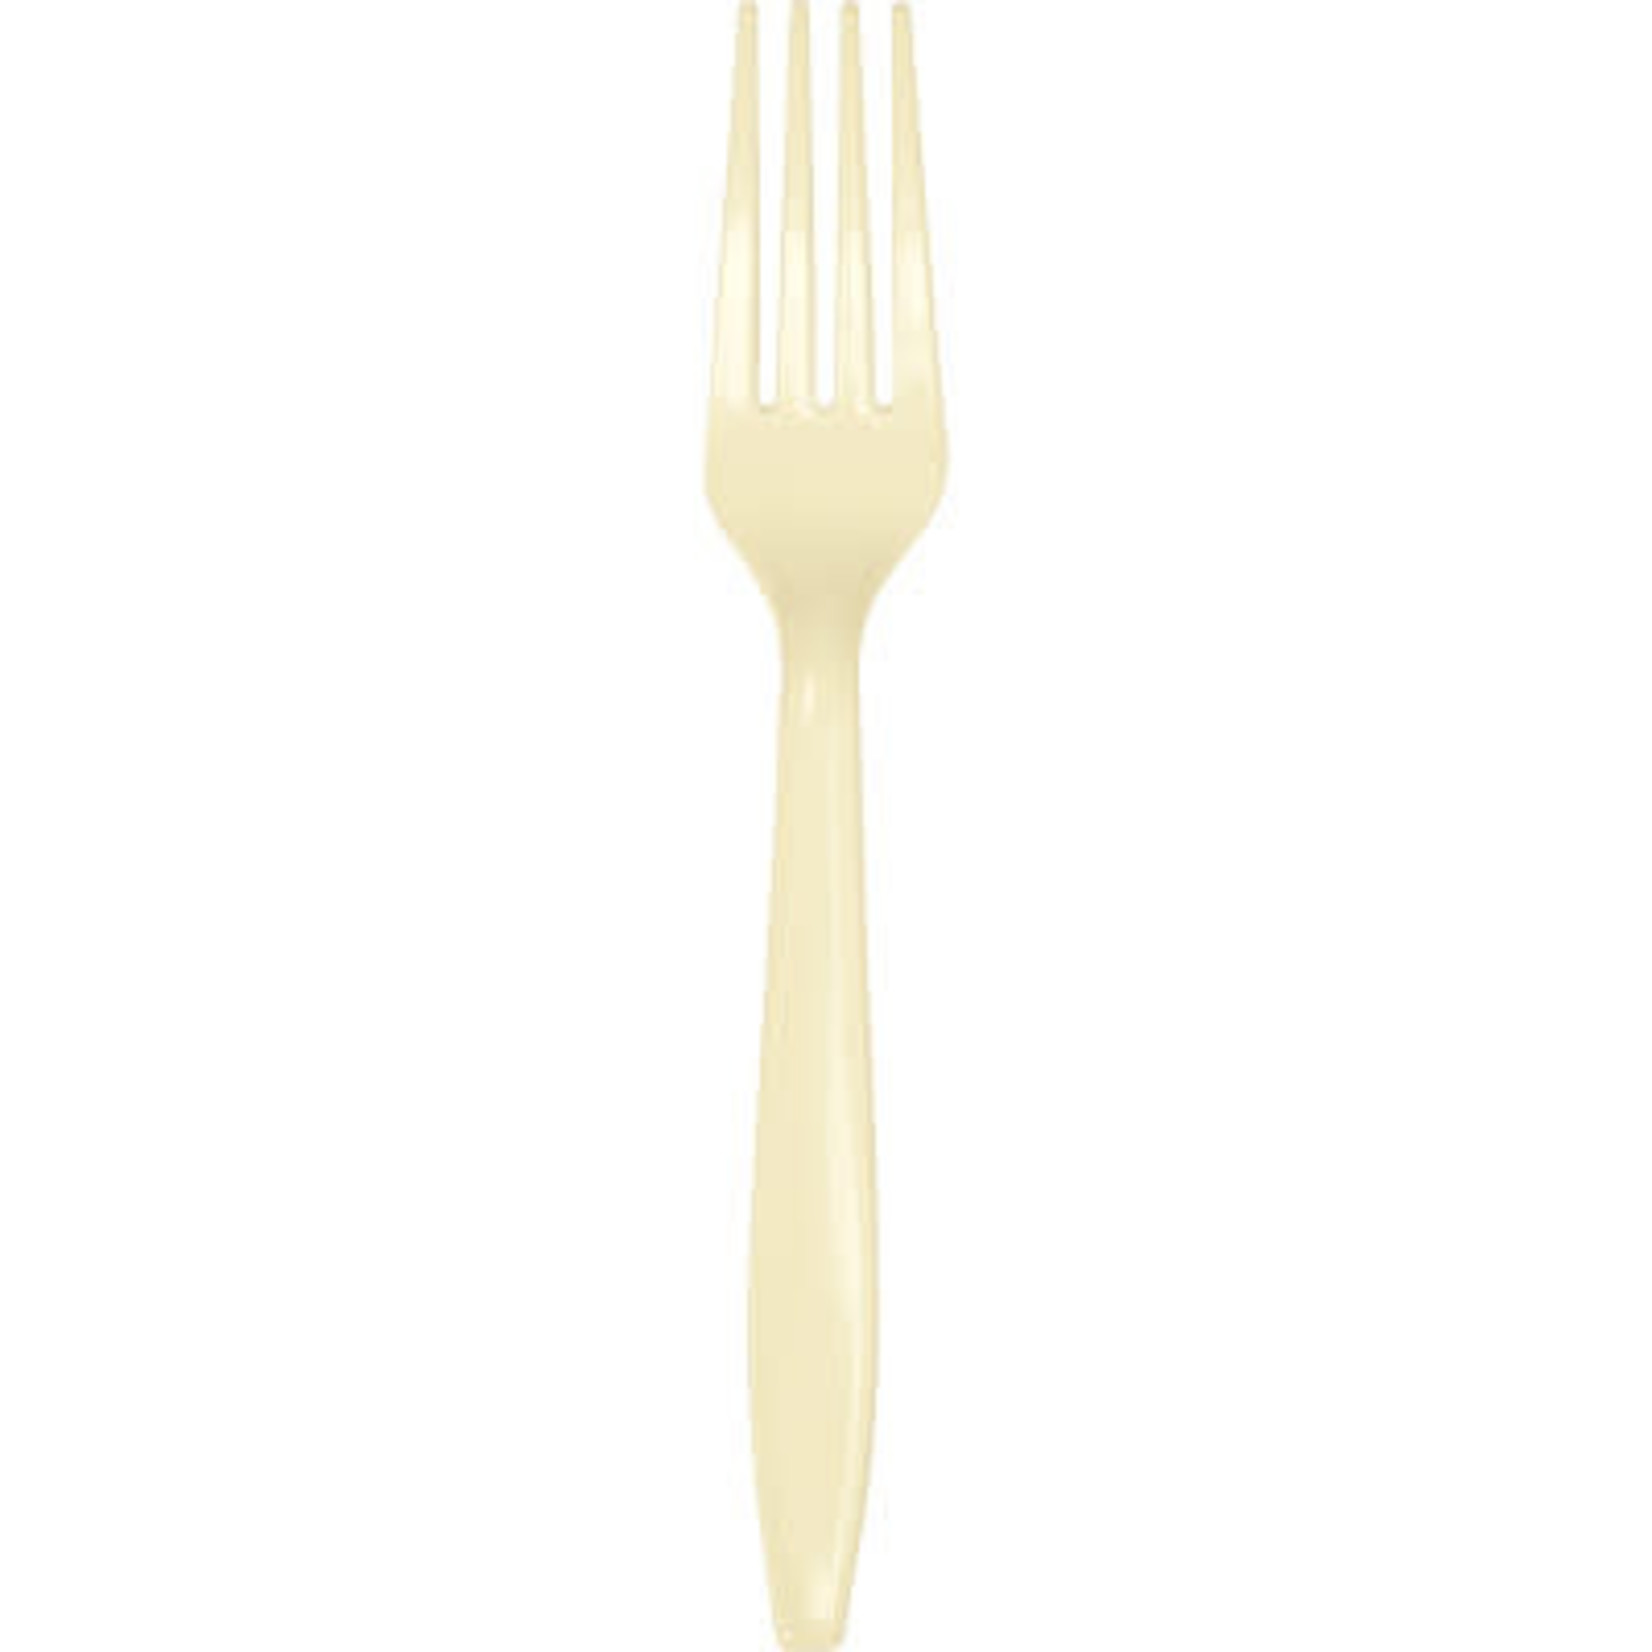 Touch of Color Ivory Premium Plastic Forks - 24ct.